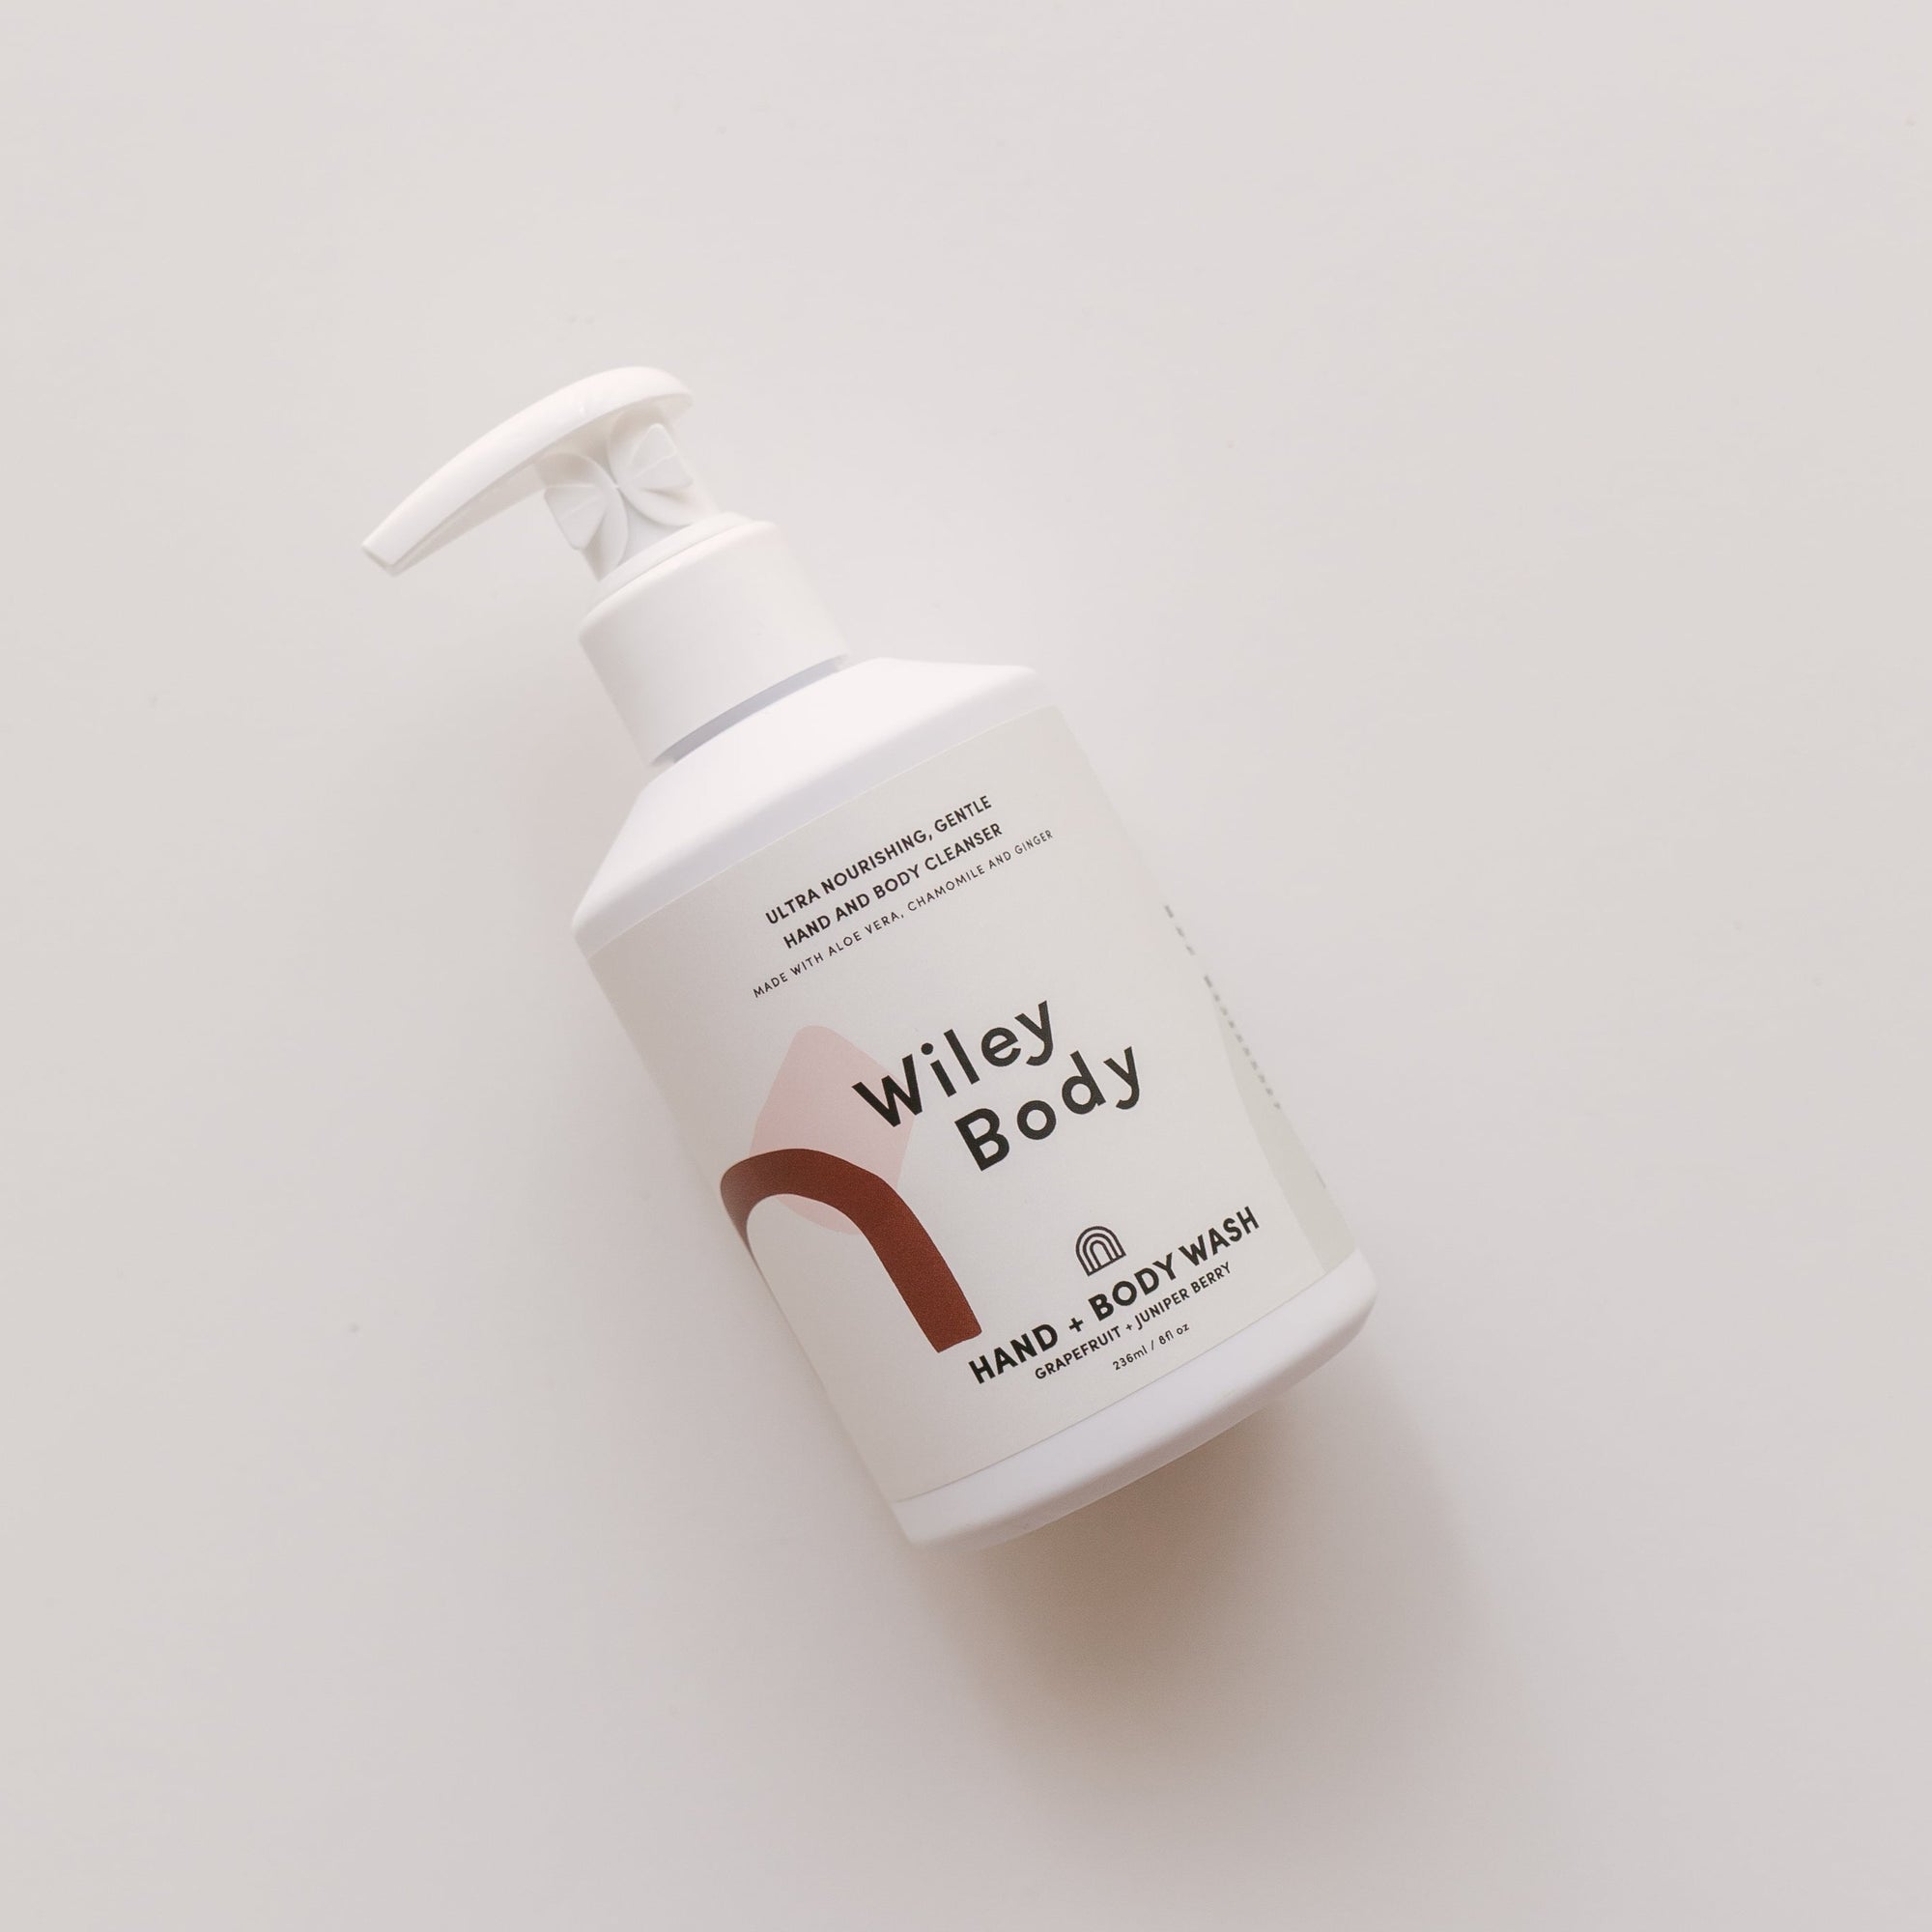 A Wiley Body hand & body wash featuring the superfood ginger, placed on a white surface.